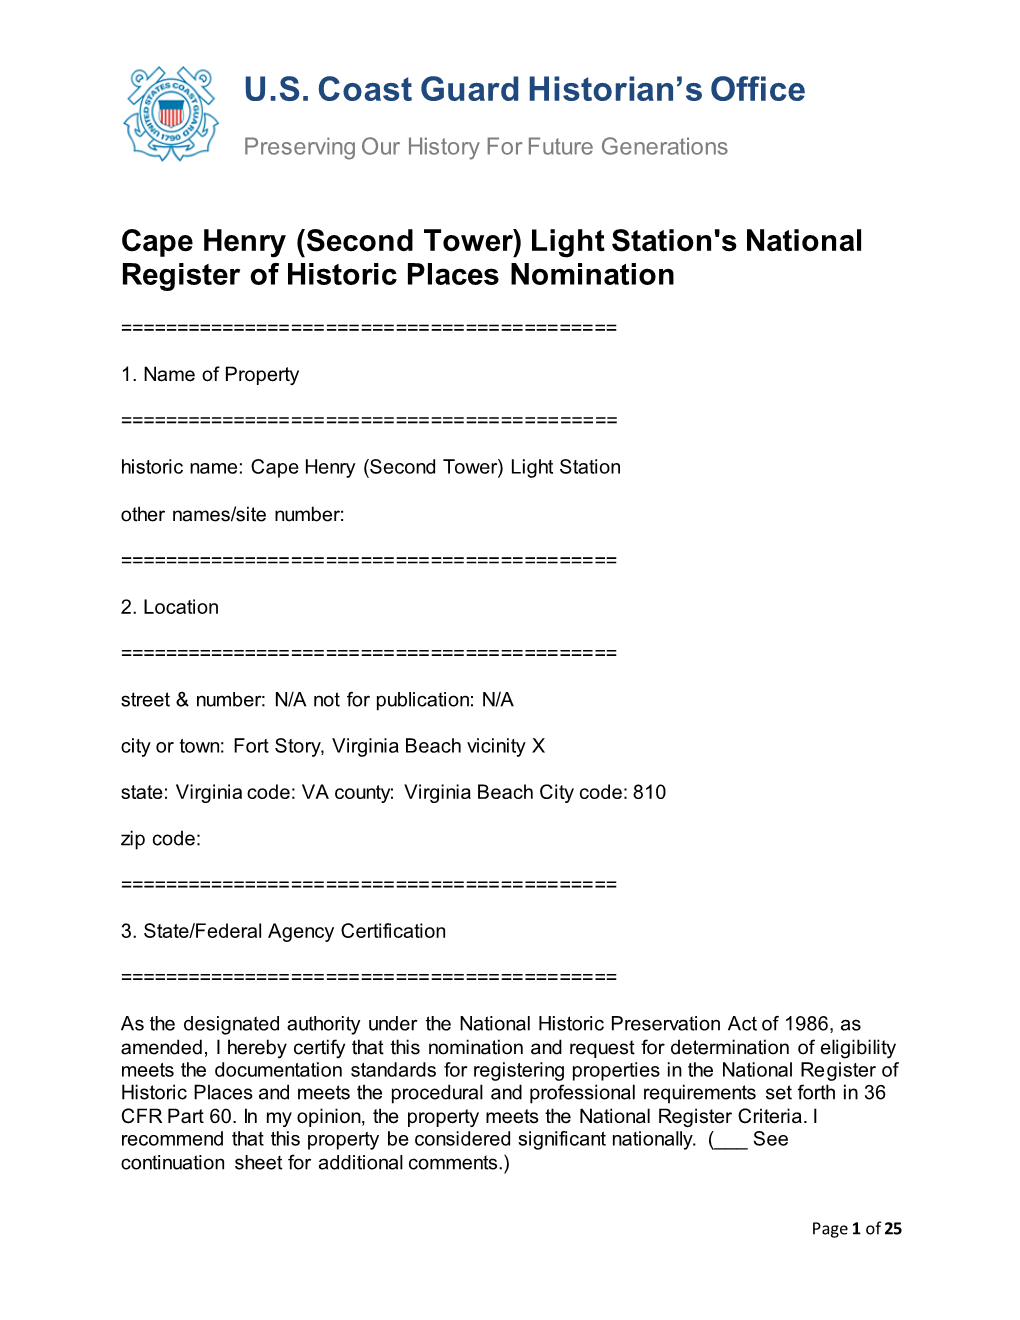 Cape Henry (Second Tower) Light Station's National Register of Historic Places Nomination